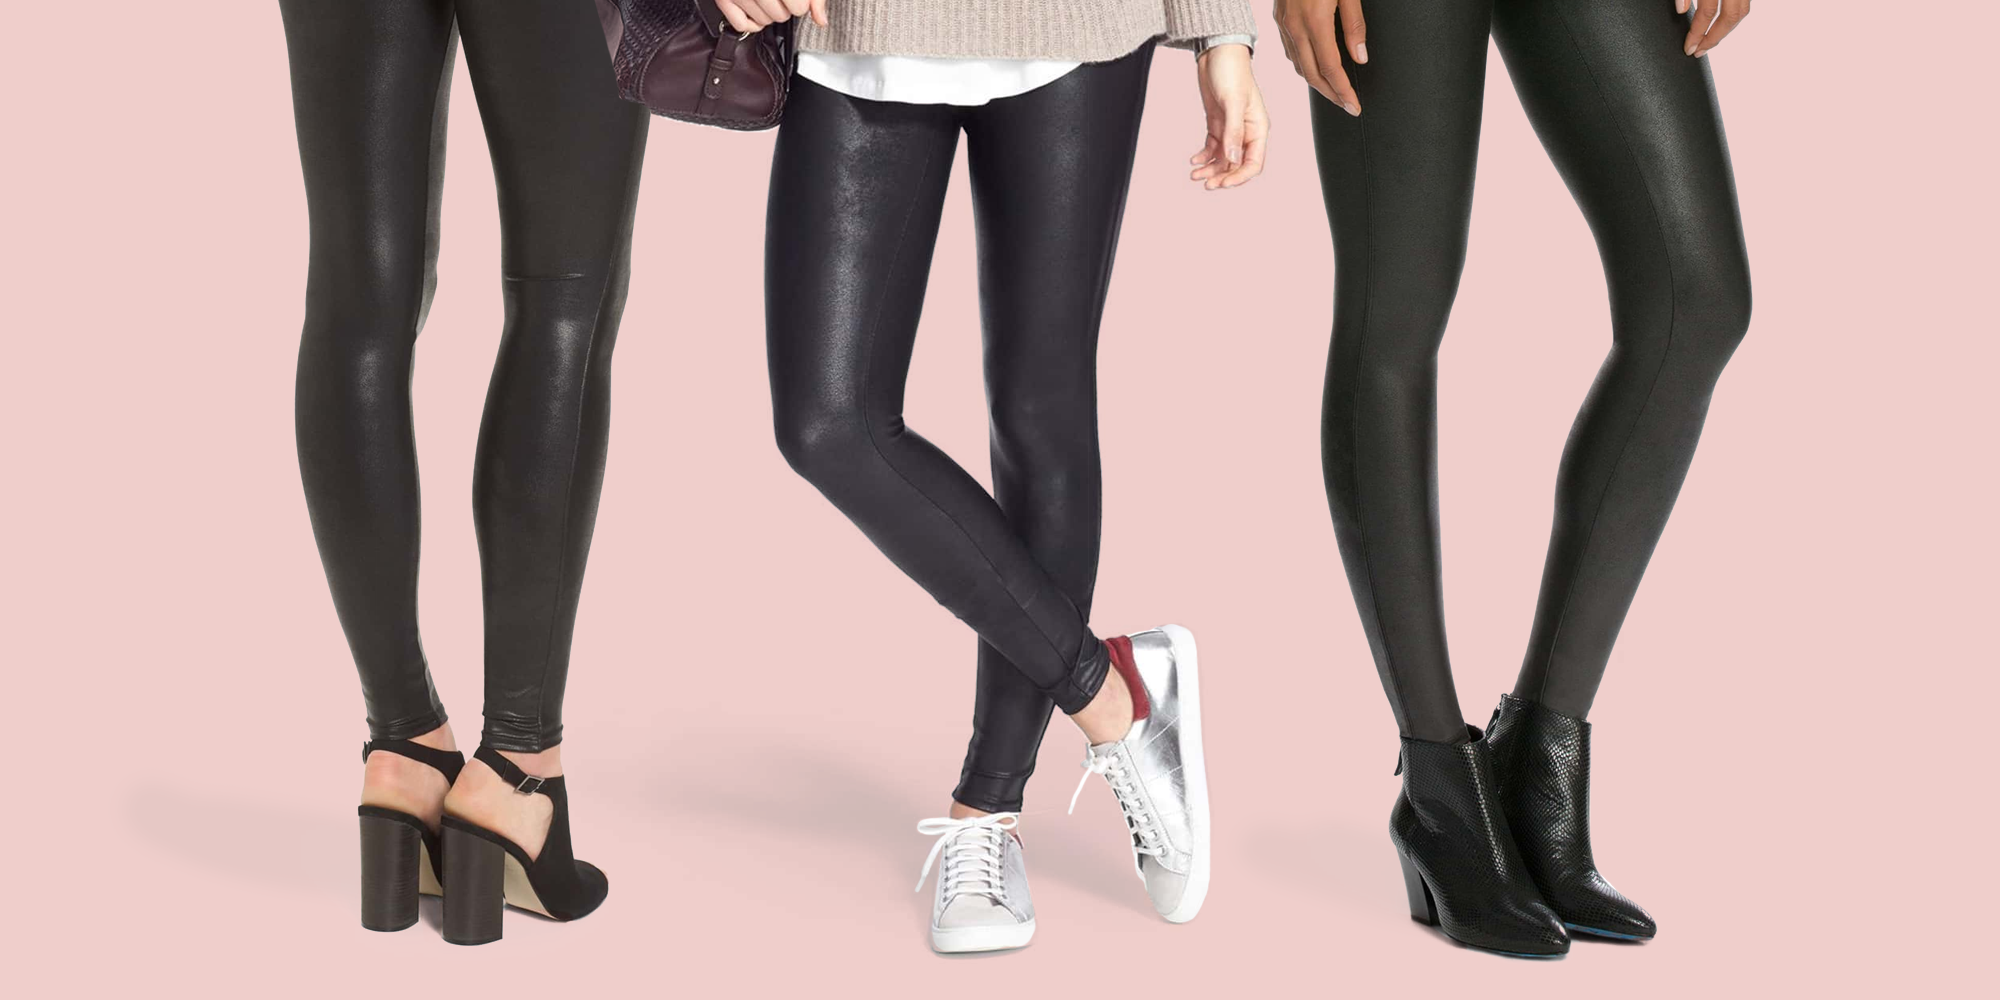 Review: Spanx Faux Leather Leggings - Wedded Liss